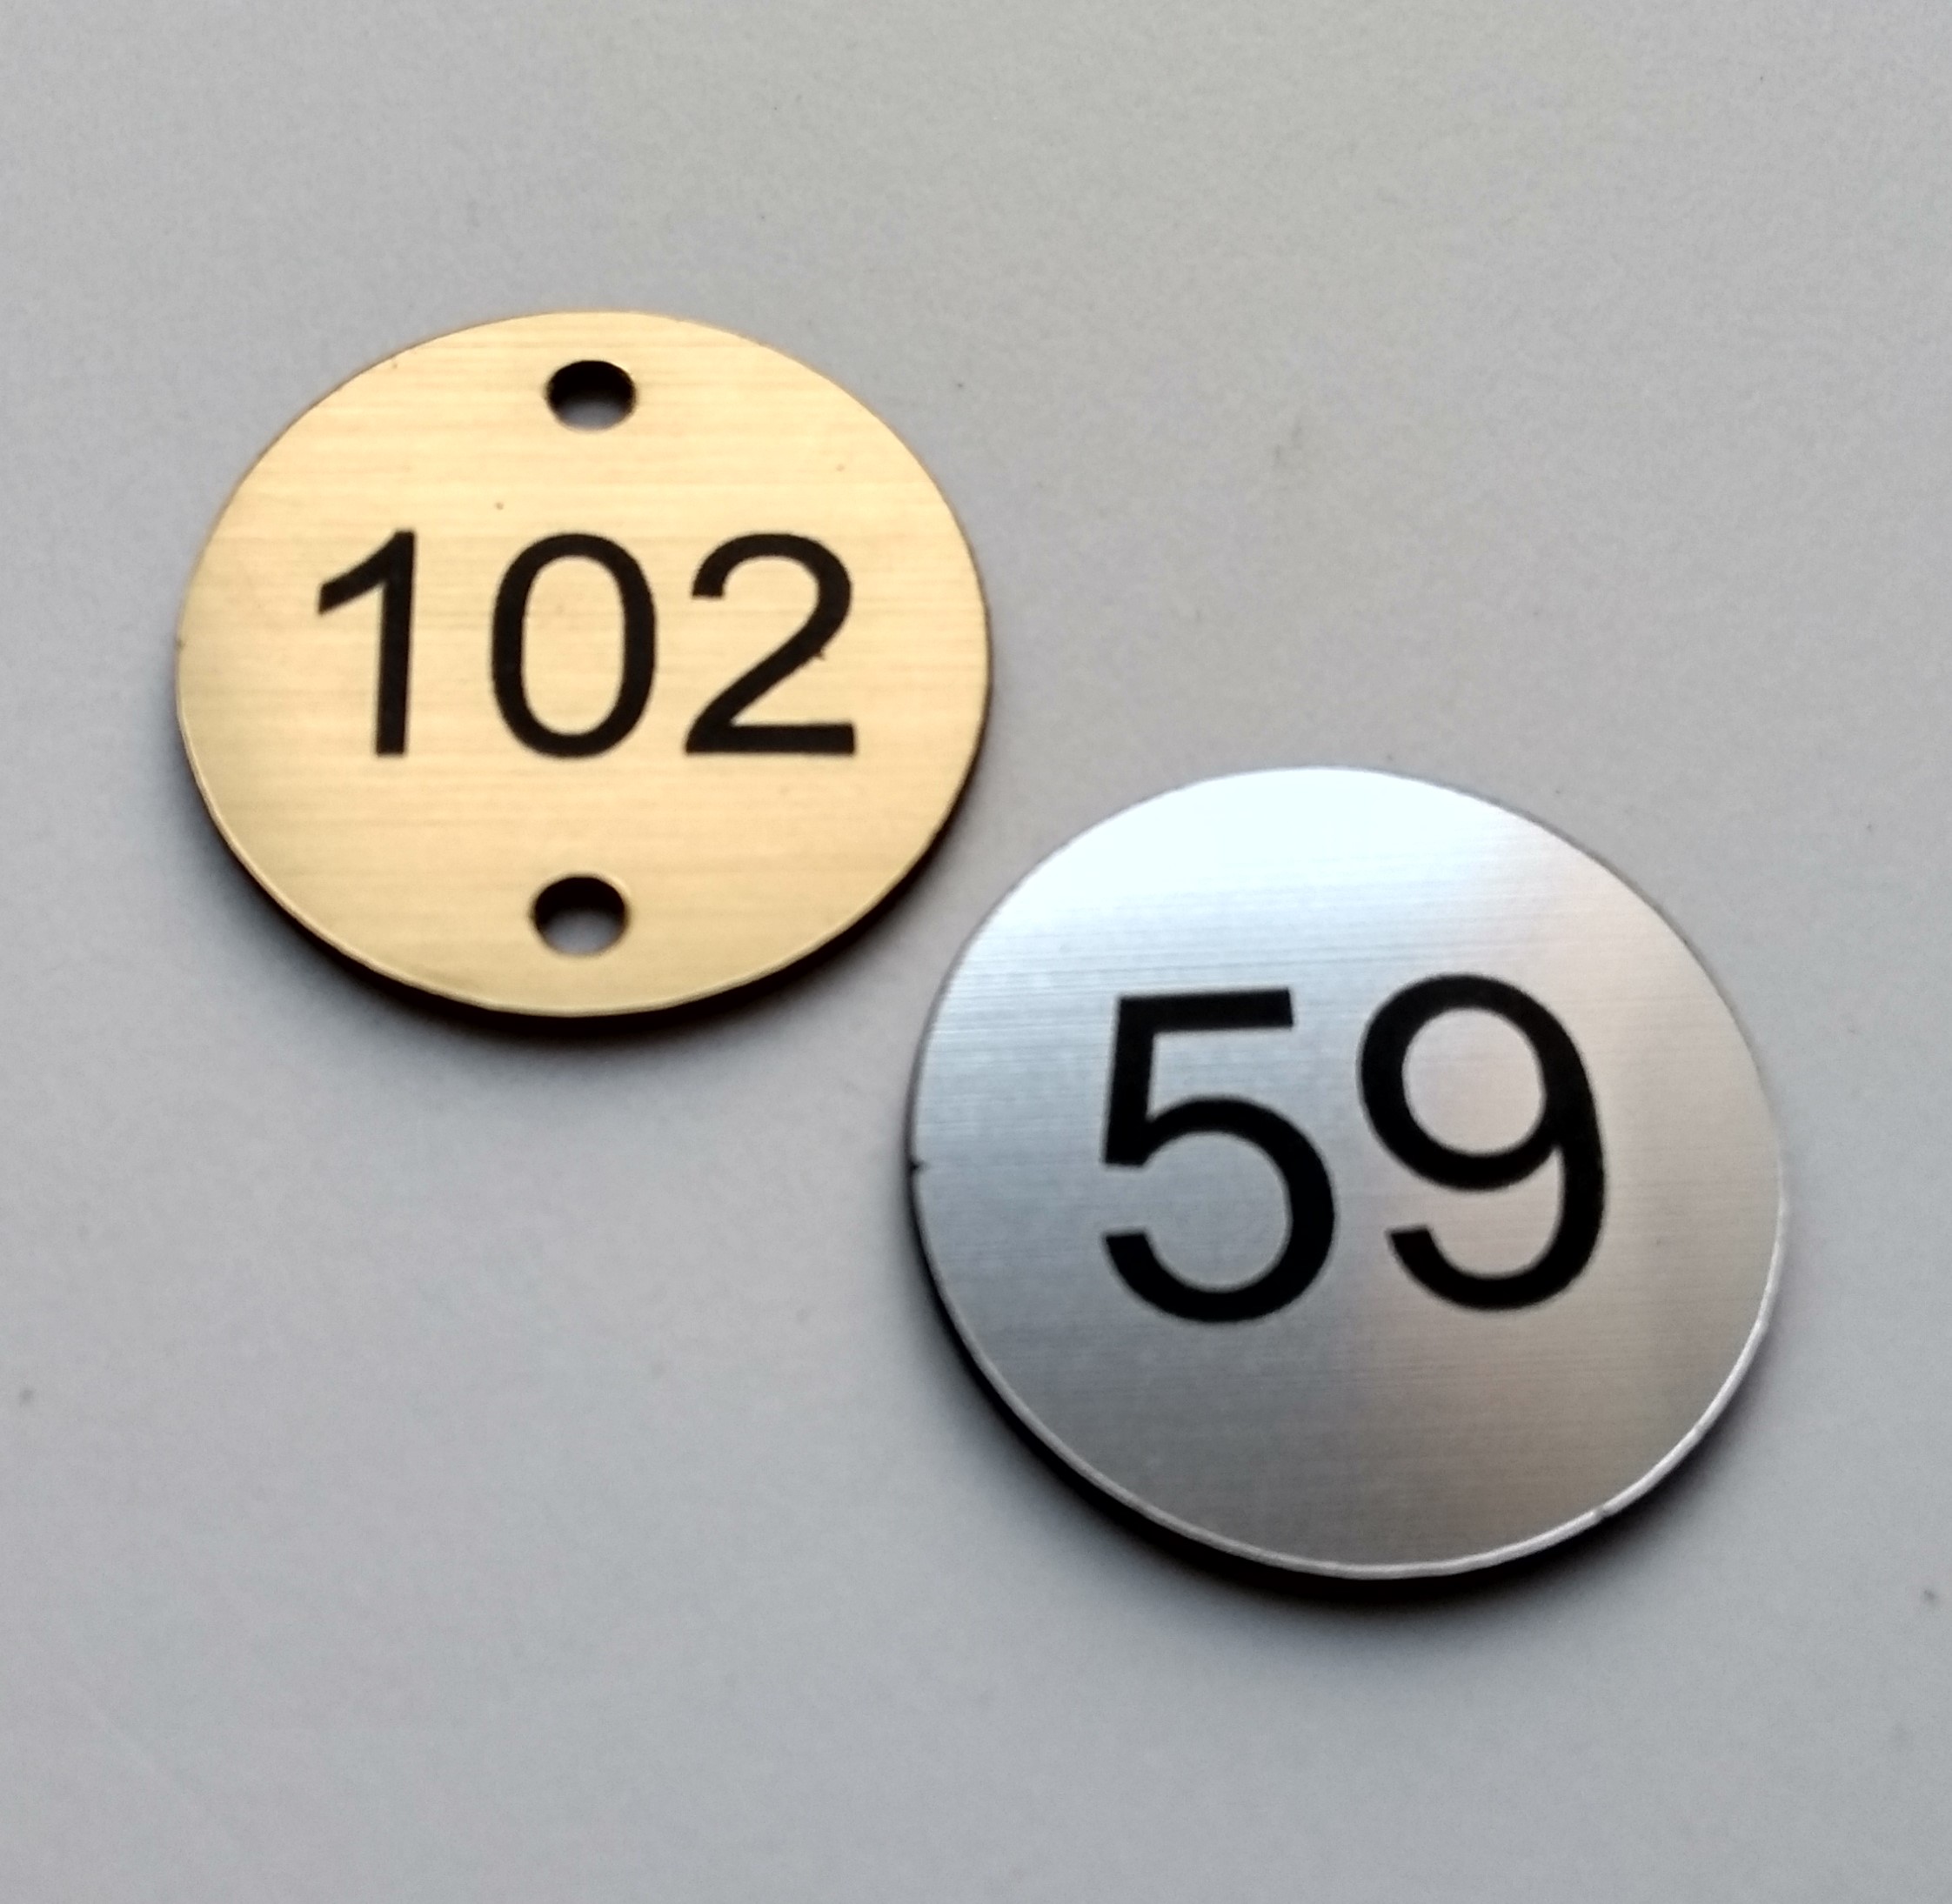 1-80 80 pcs with keyrings dia 25mm  Laser Engraved Number Discs, 